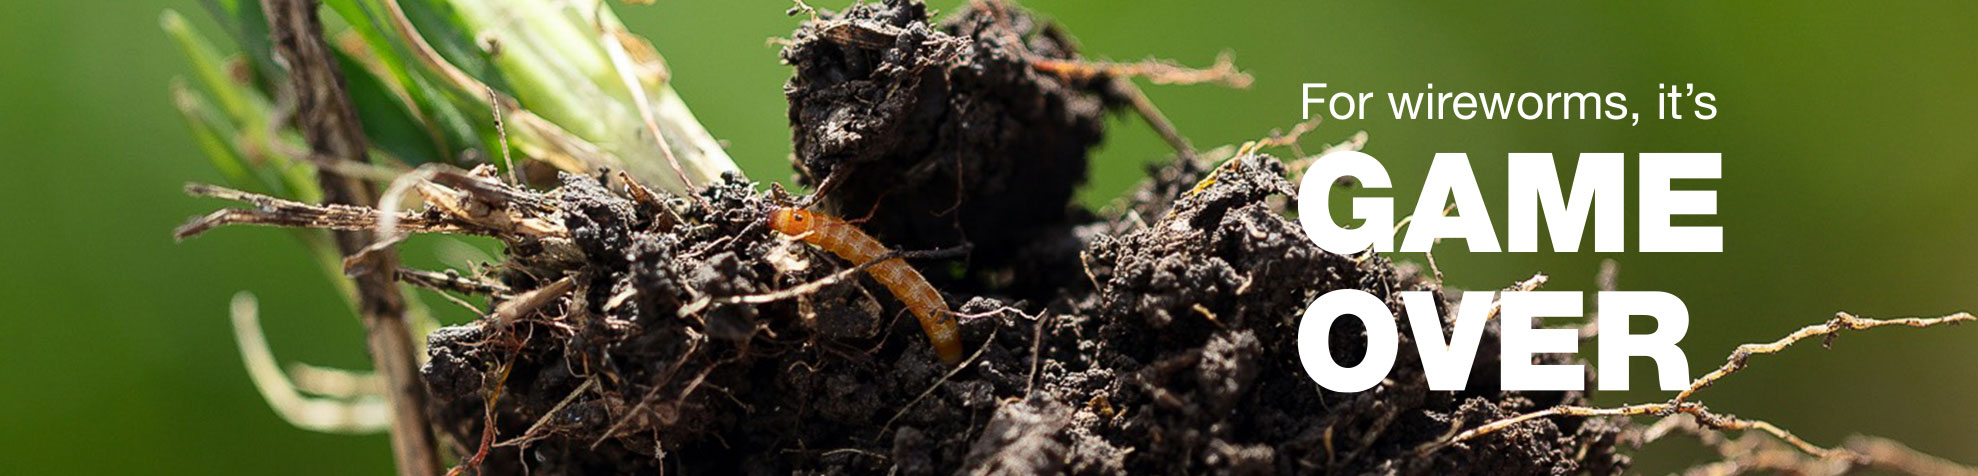 Wireworm image - For Wireworms, it's Game Over